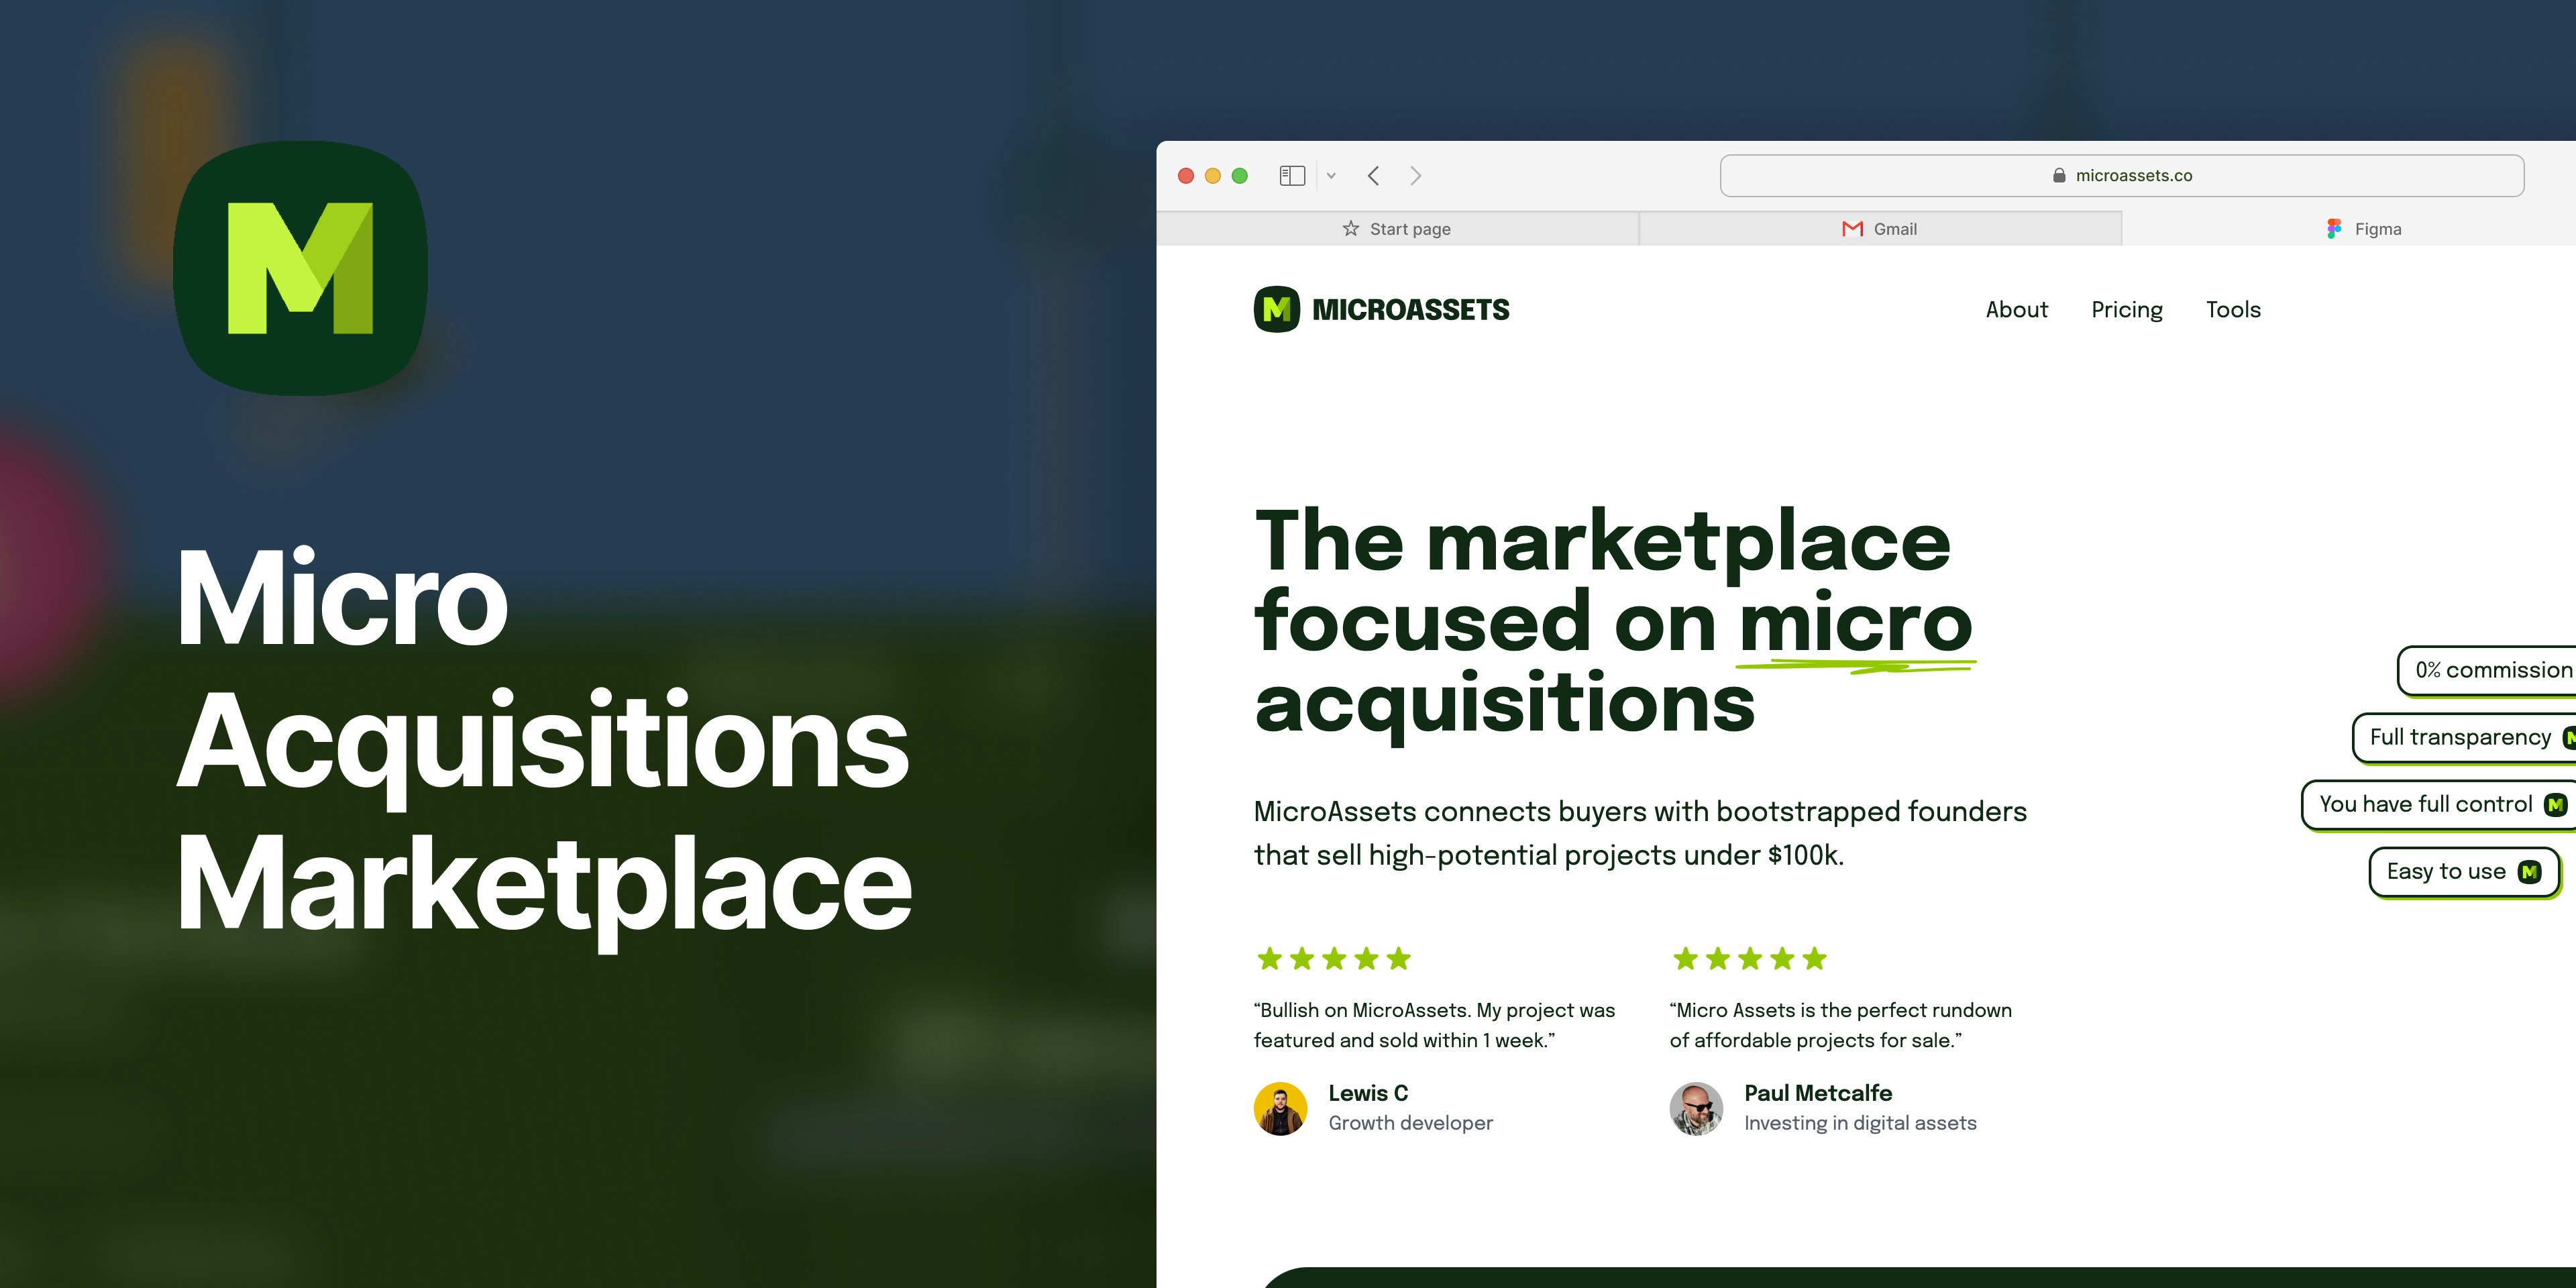 microassets - The marketplace focused on micro acquisitions